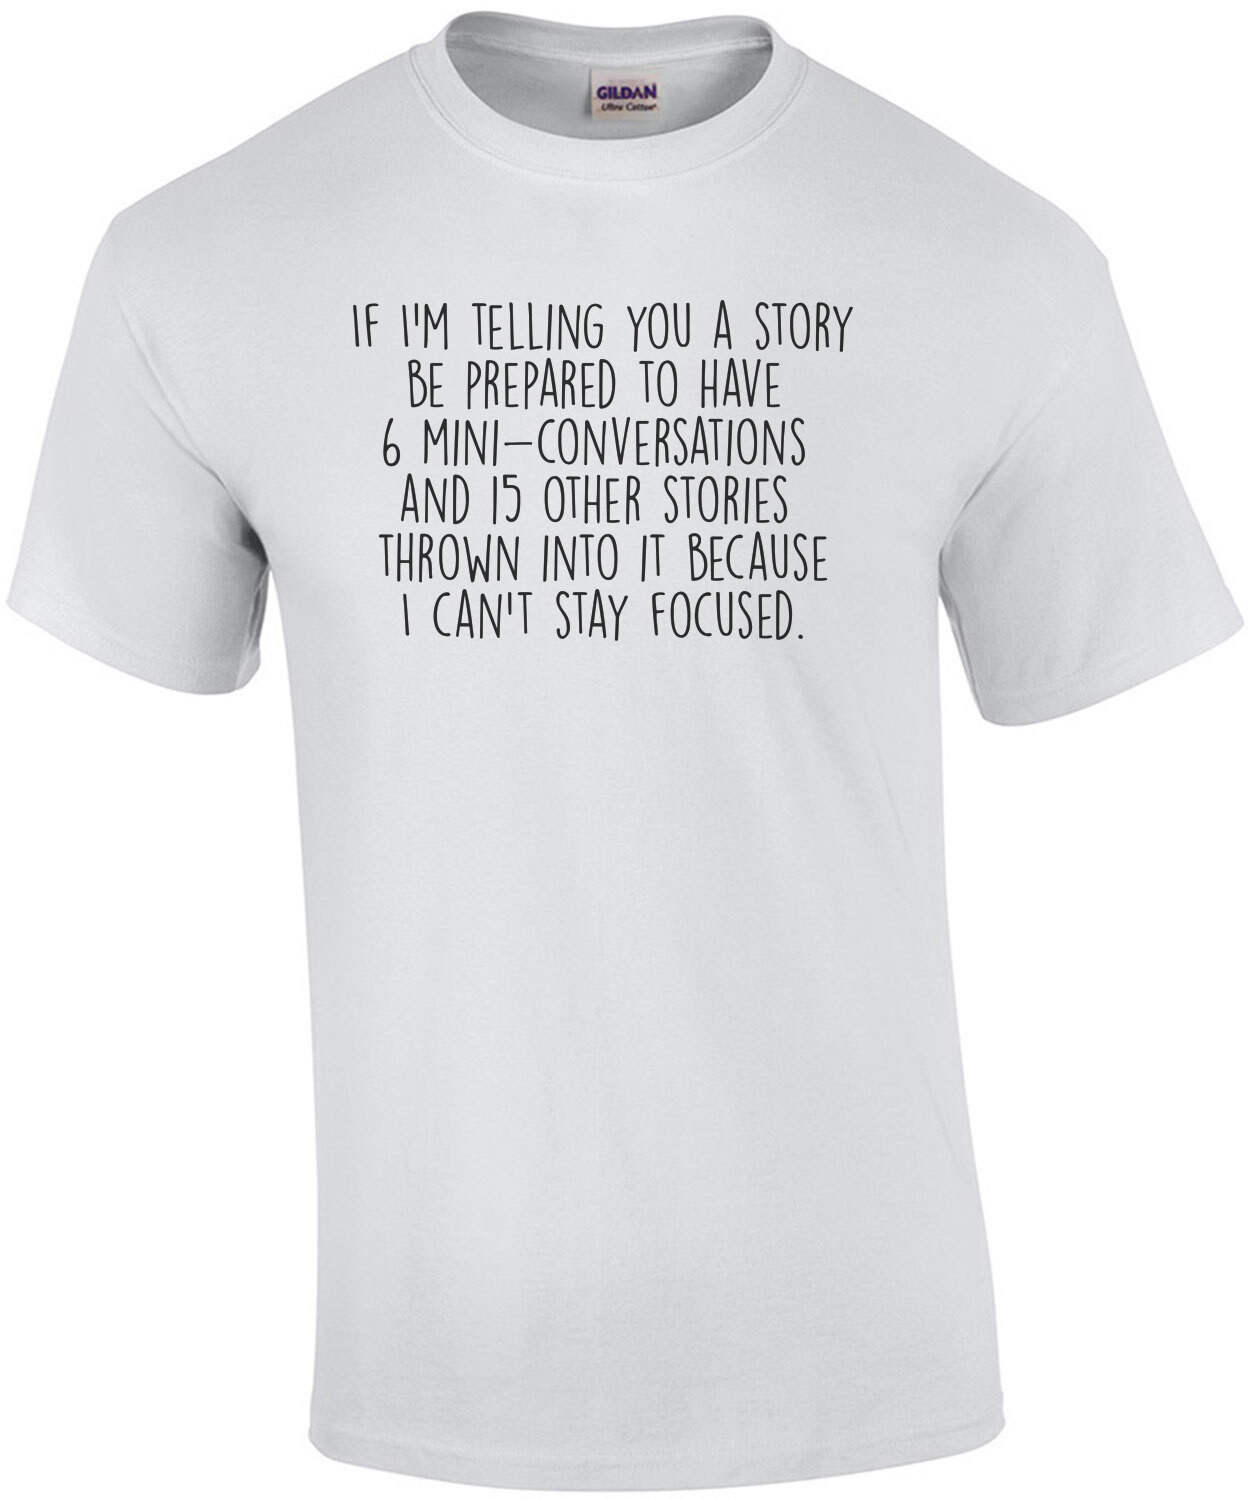 If I'm telling you a story be prepared to have 6 mini conversations and 15 other stories thrown into it because I can't stay focused. Funny ladies t-shirt